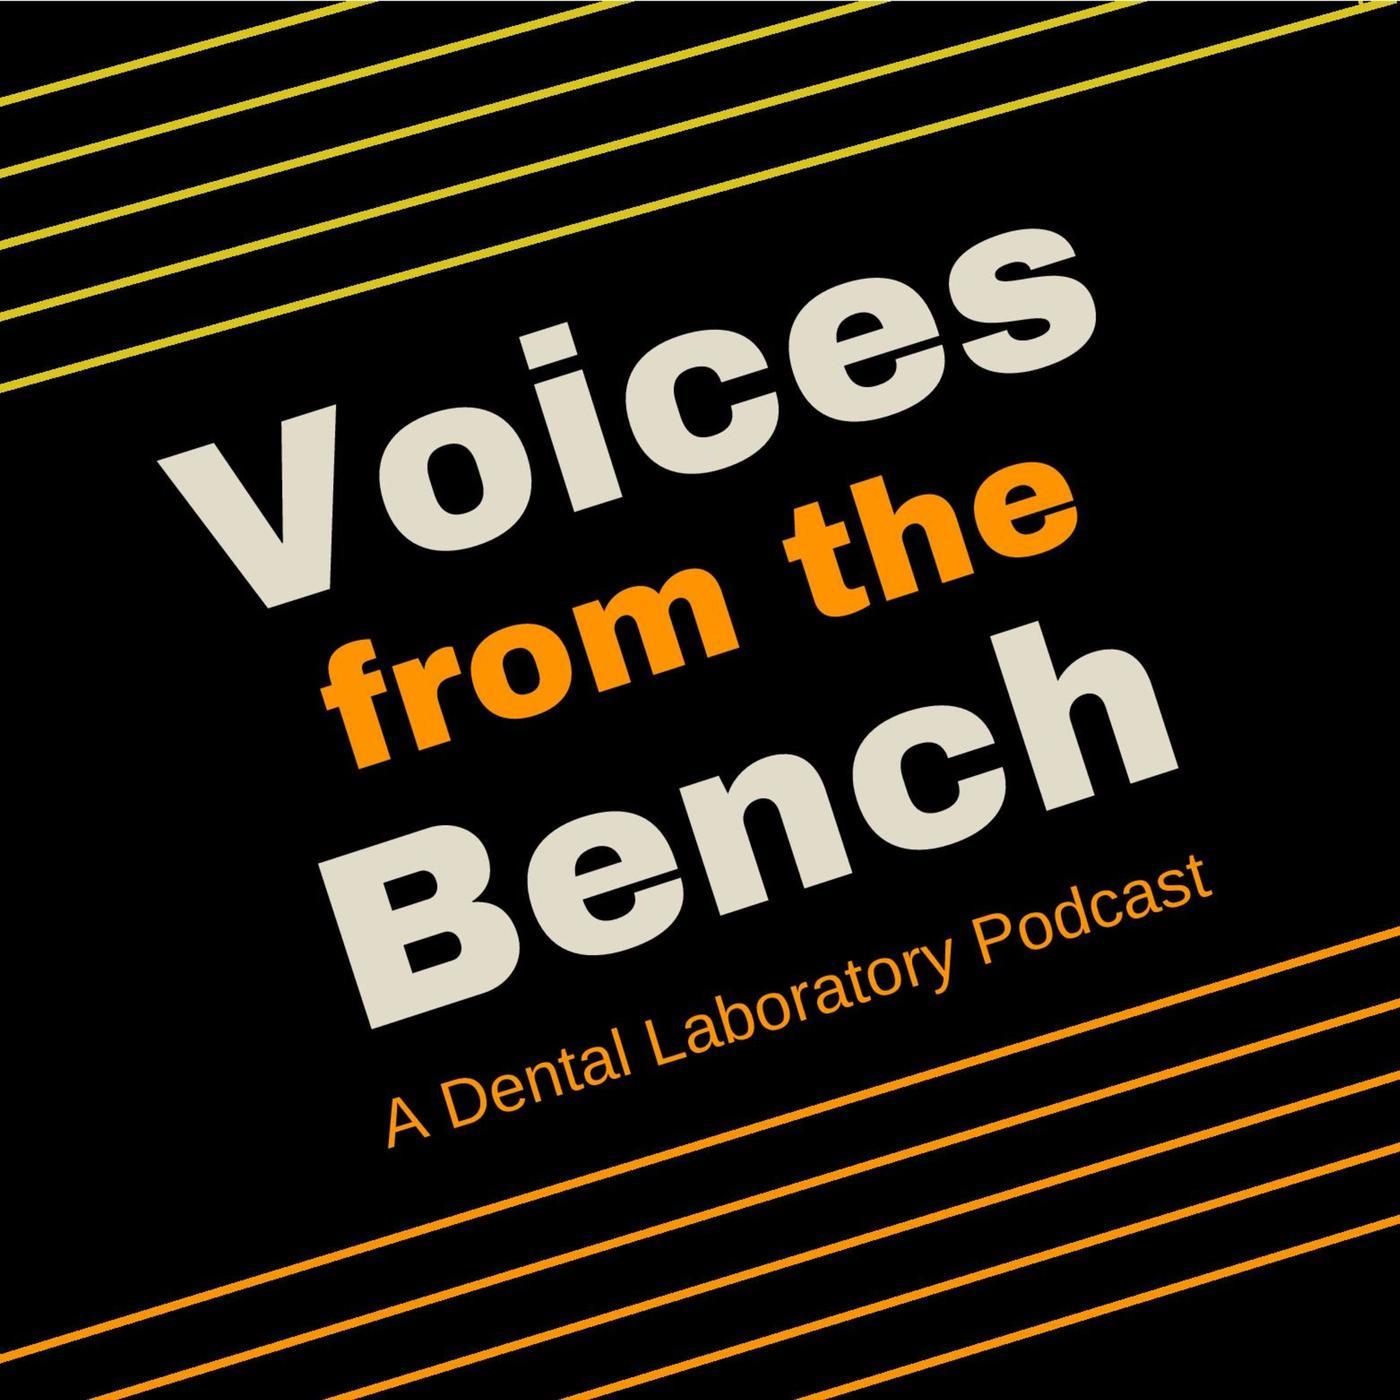 Voices from The Bench 261: A CDT of DLT at LSU with Tracy Graham